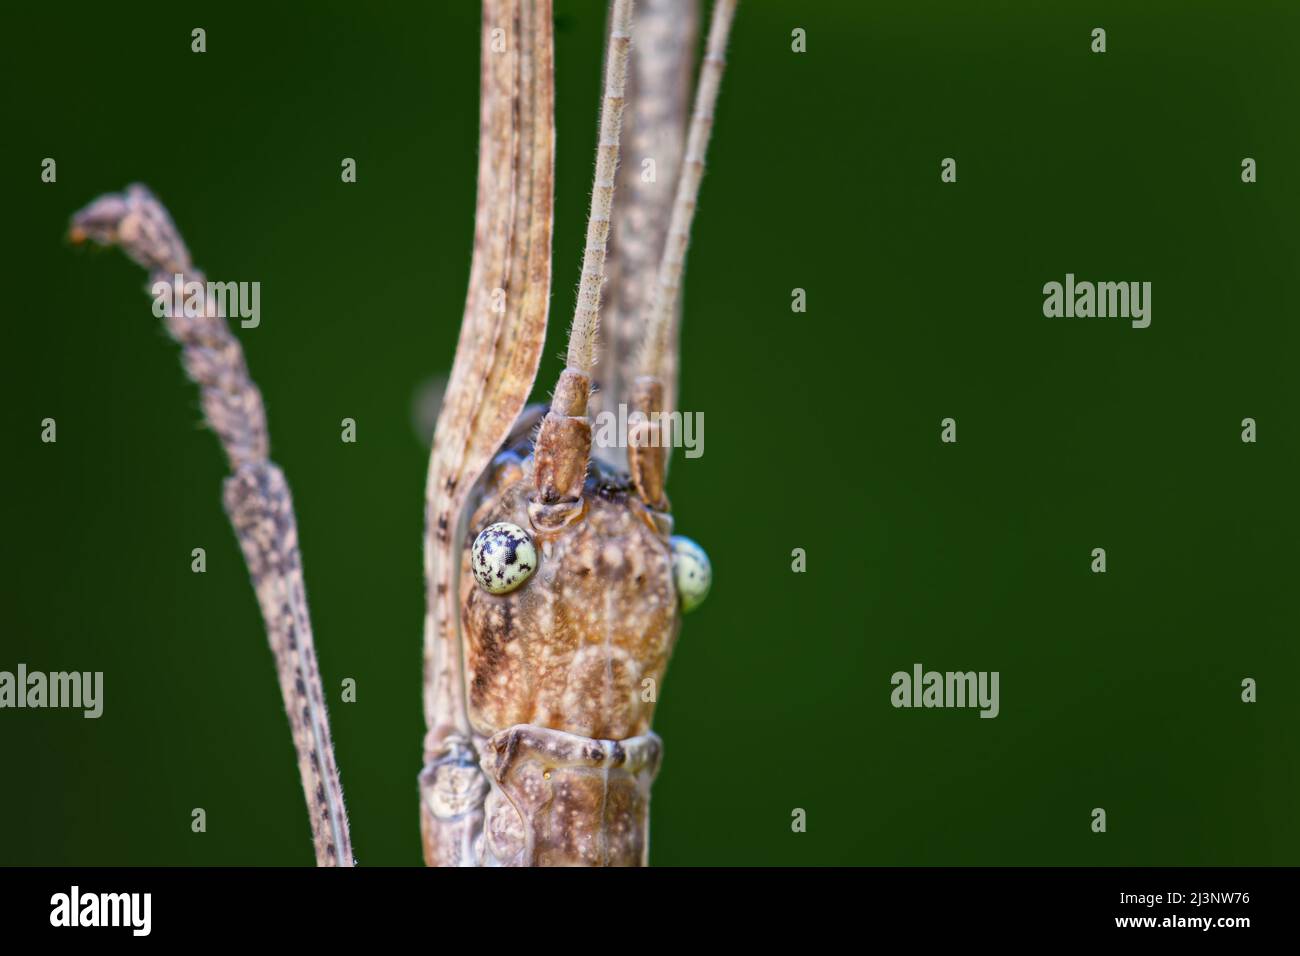 Portrait of White-kneed Stick Insect - Acacus sarawacus, unique special insect from Sarawak forests, Borneo, Malaysia. Stock Photo